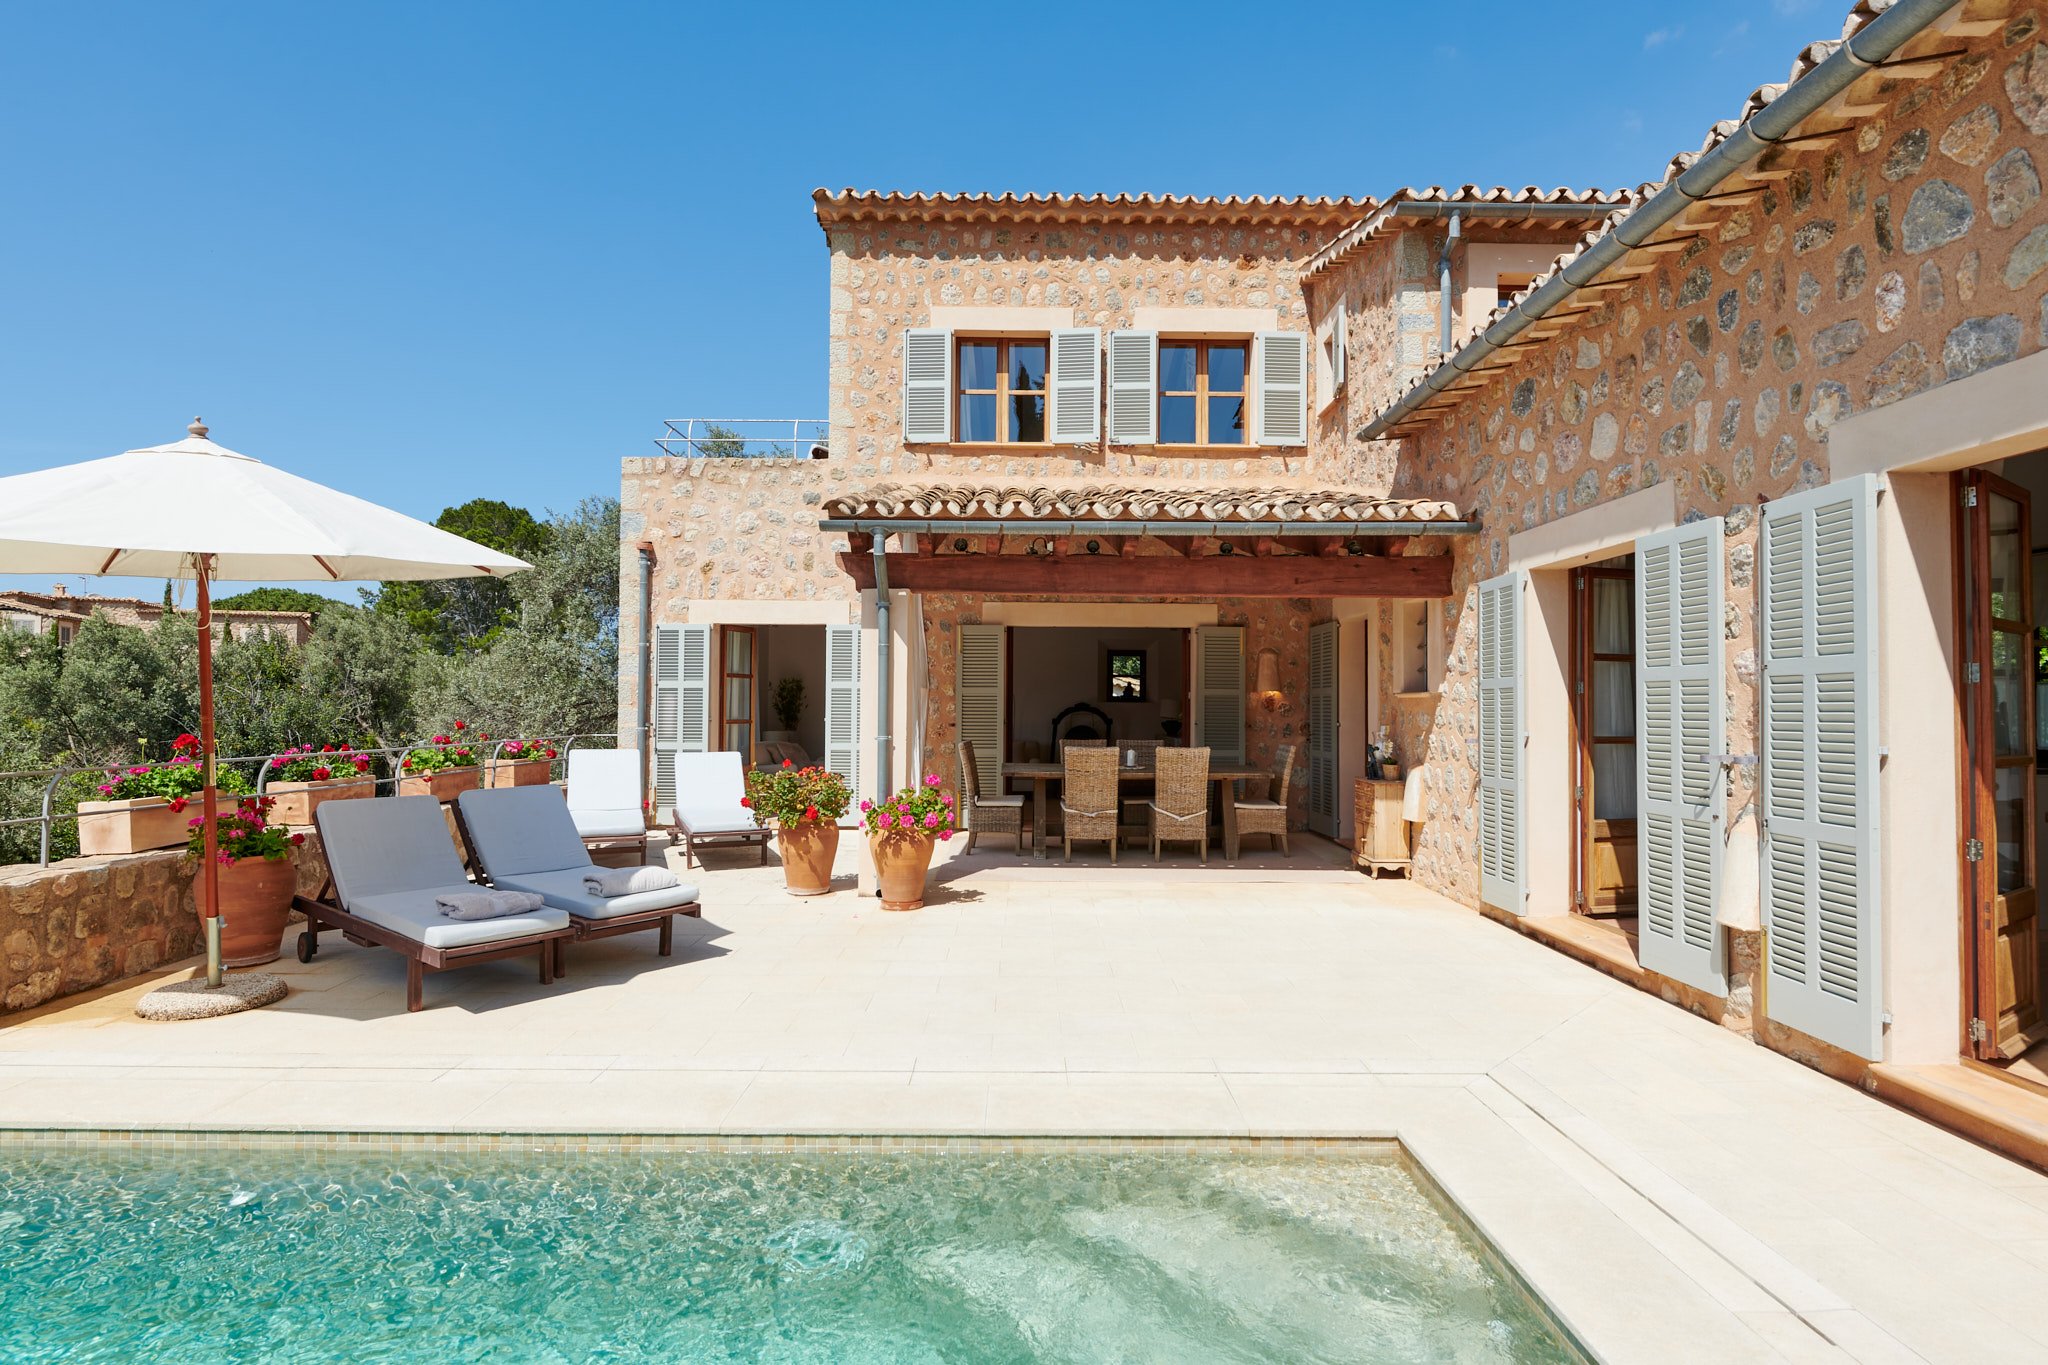 Francis York Casa Charlotte Dream Monthly Holiday Rental in Deia, Mallorca Available in September 6.jpg